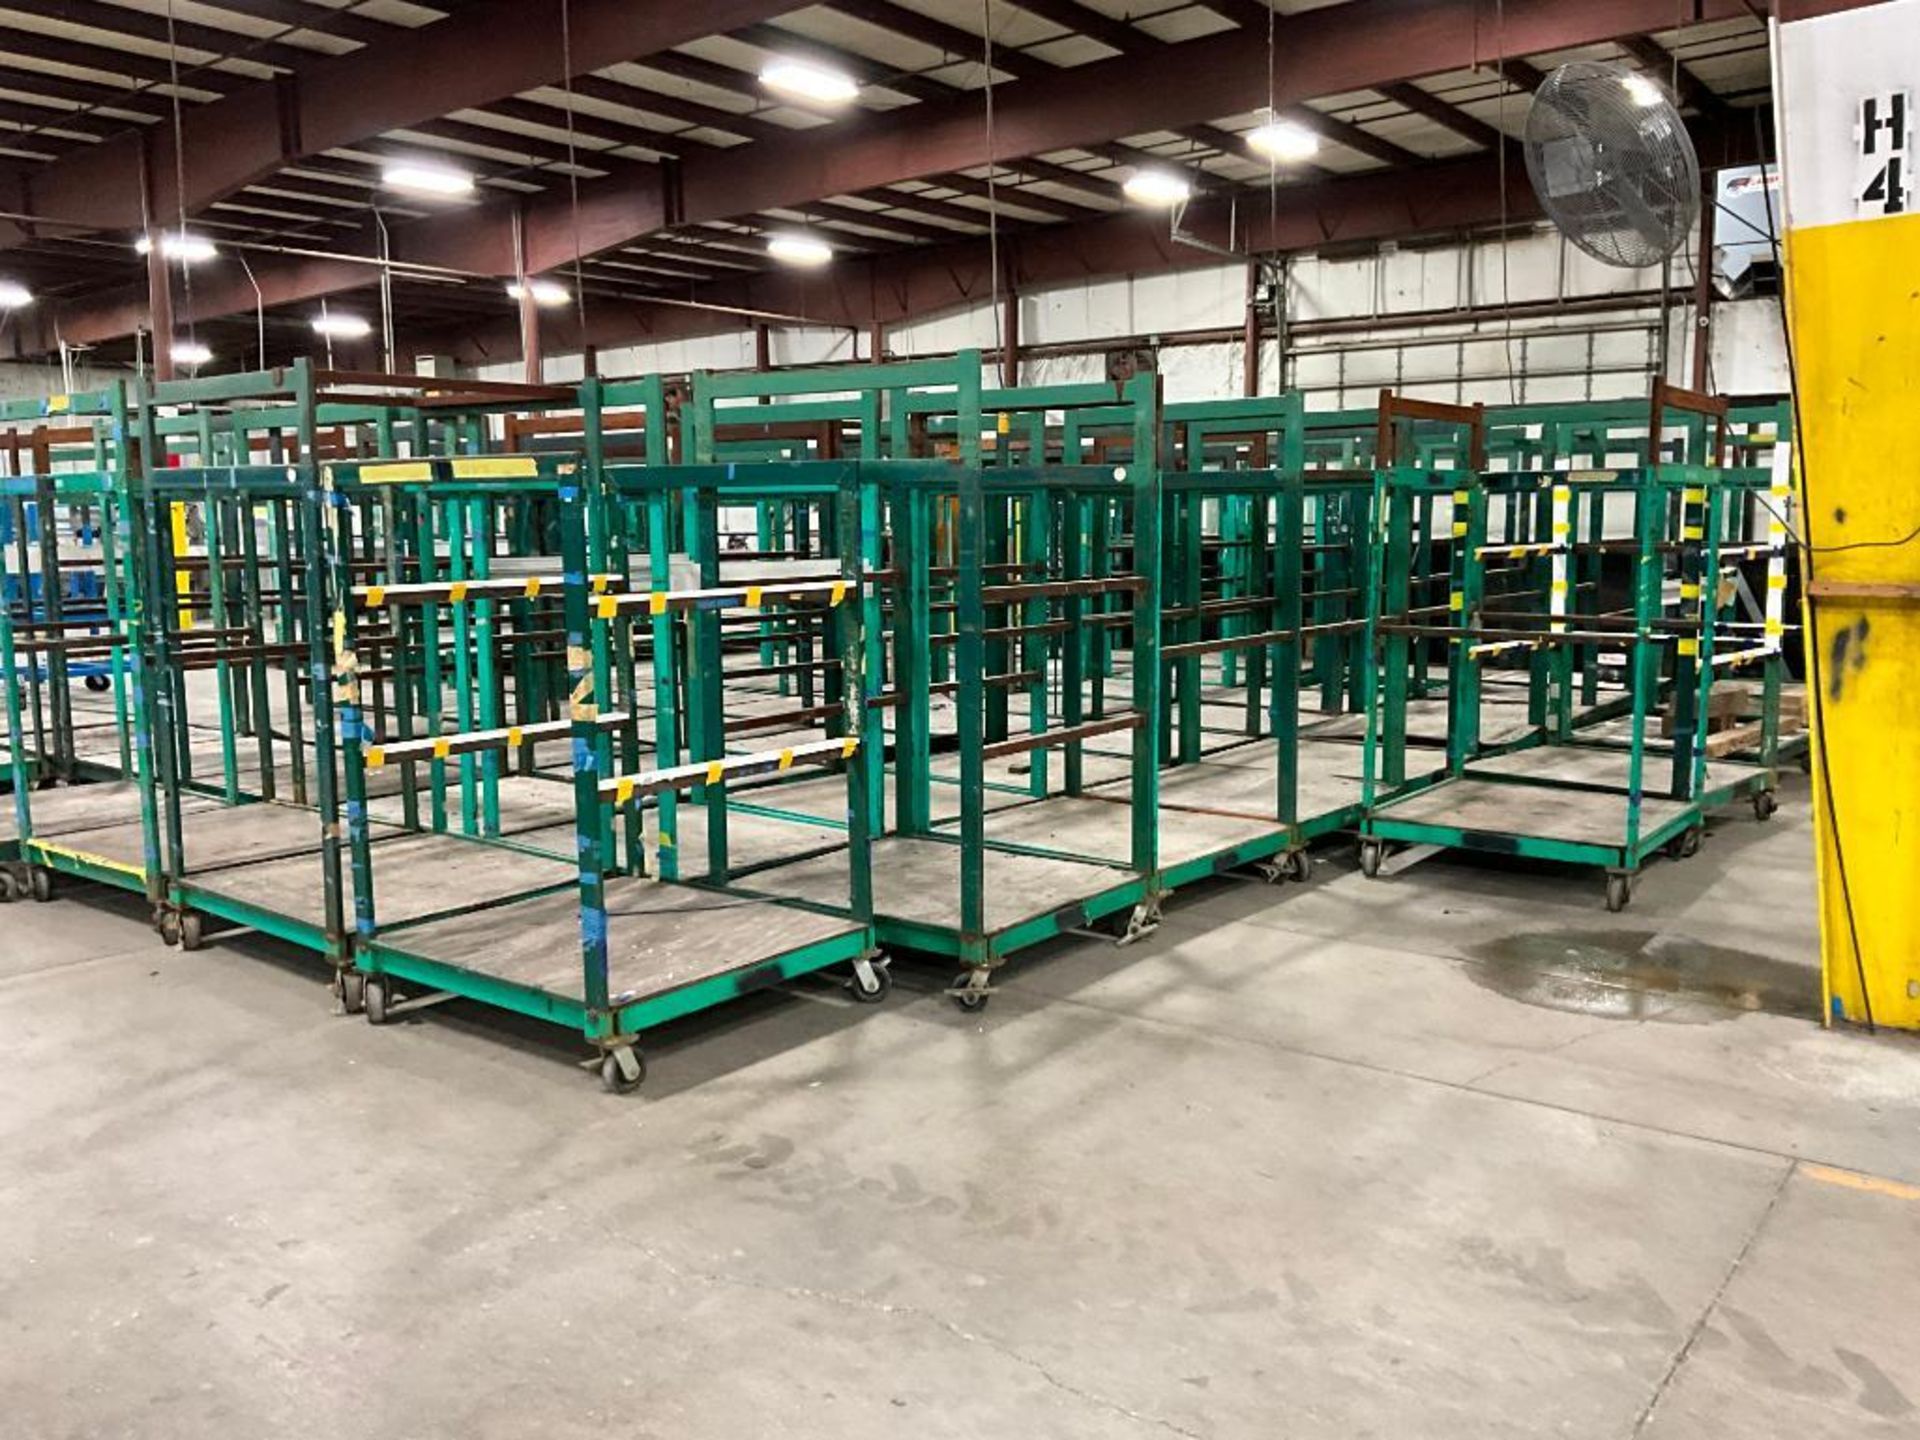 (88) Storage Racks on Casters, 70" H x 48" W, x 44" D (Green) - Image 9 of 12